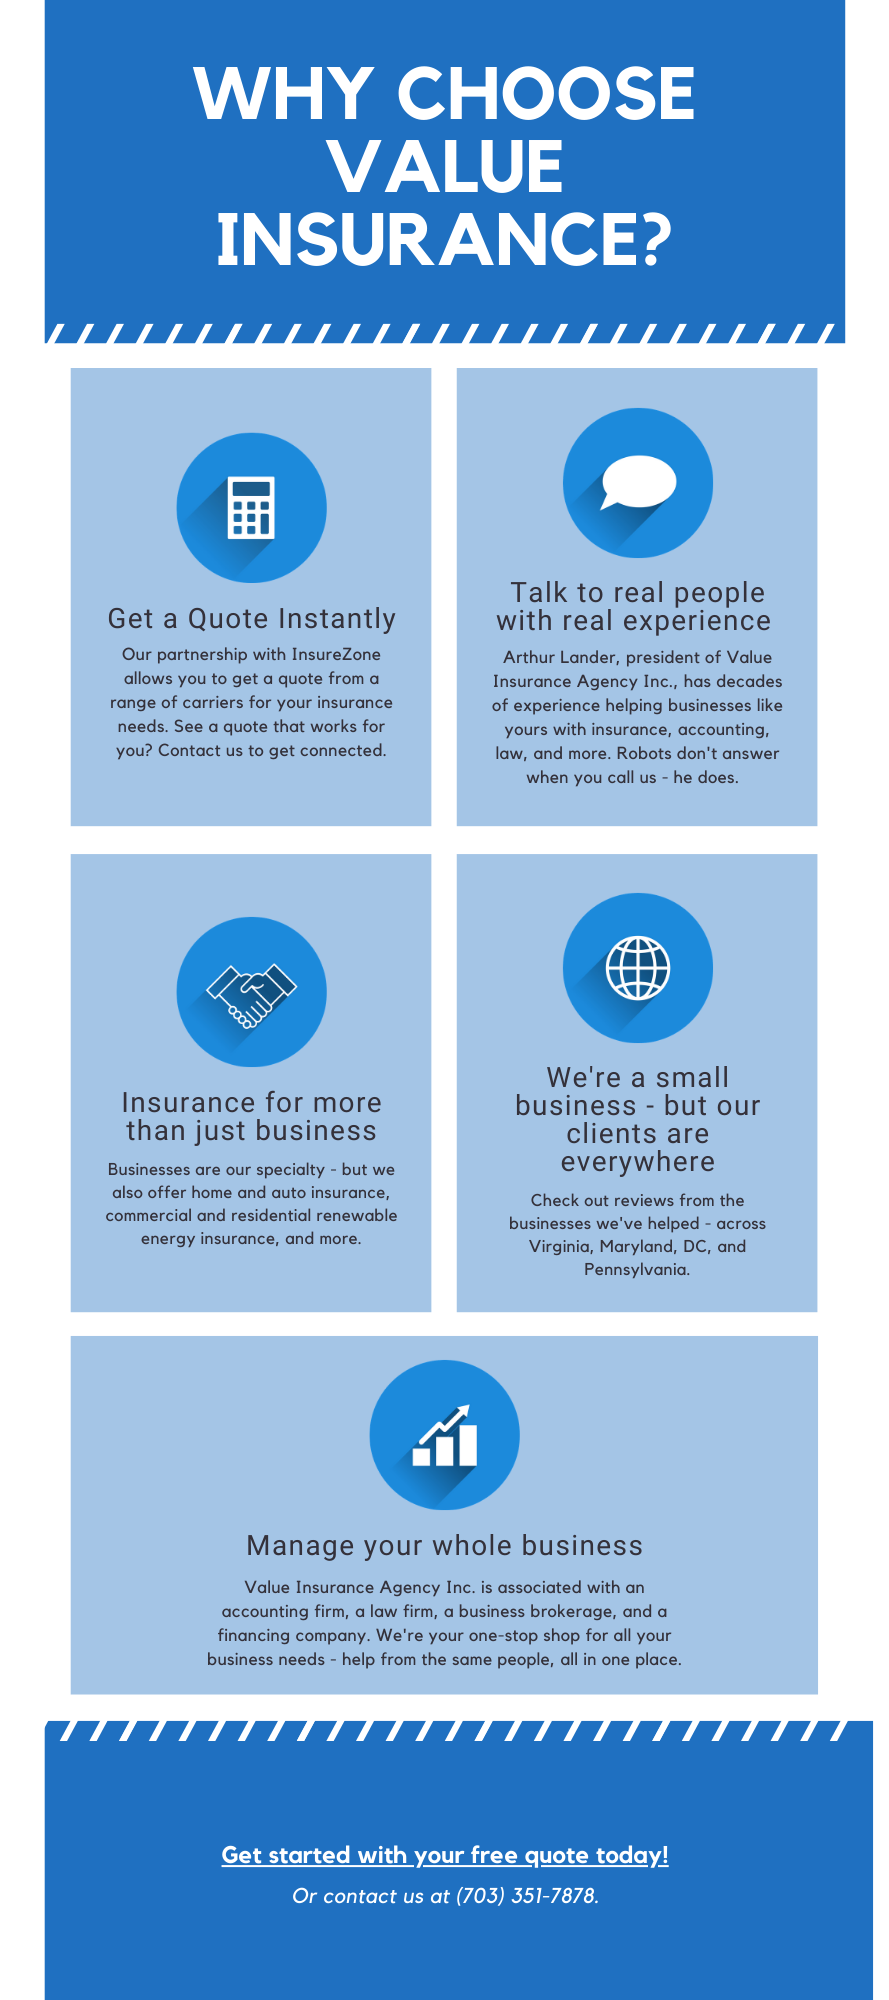 Why Choose Value Insurance Agency? - Value Insurance Agency Inc.